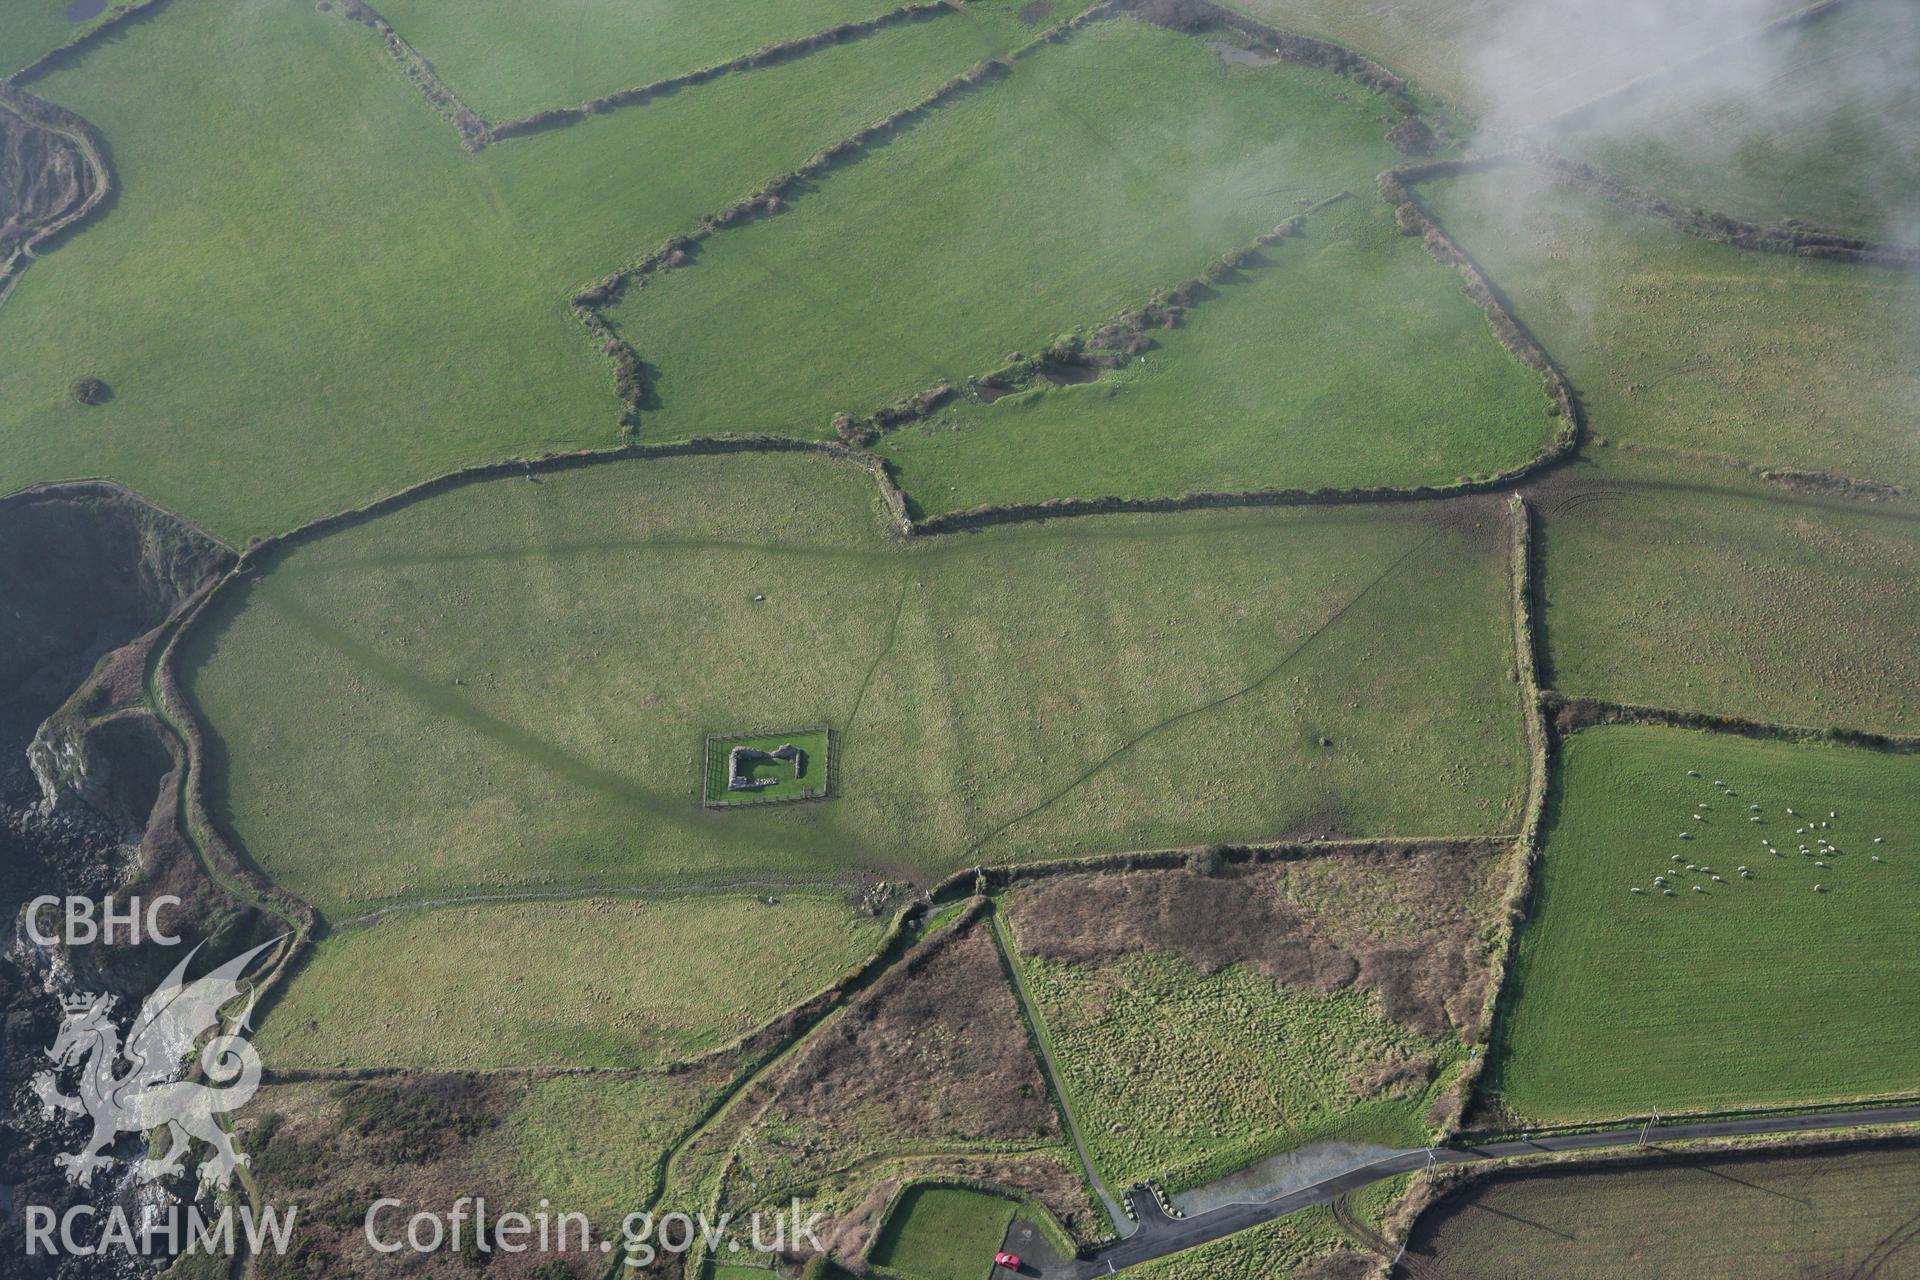 RCAHMW colour oblique aerial photograph of St Non's Chapel. Taken on 28 January 2009 by Toby Driver